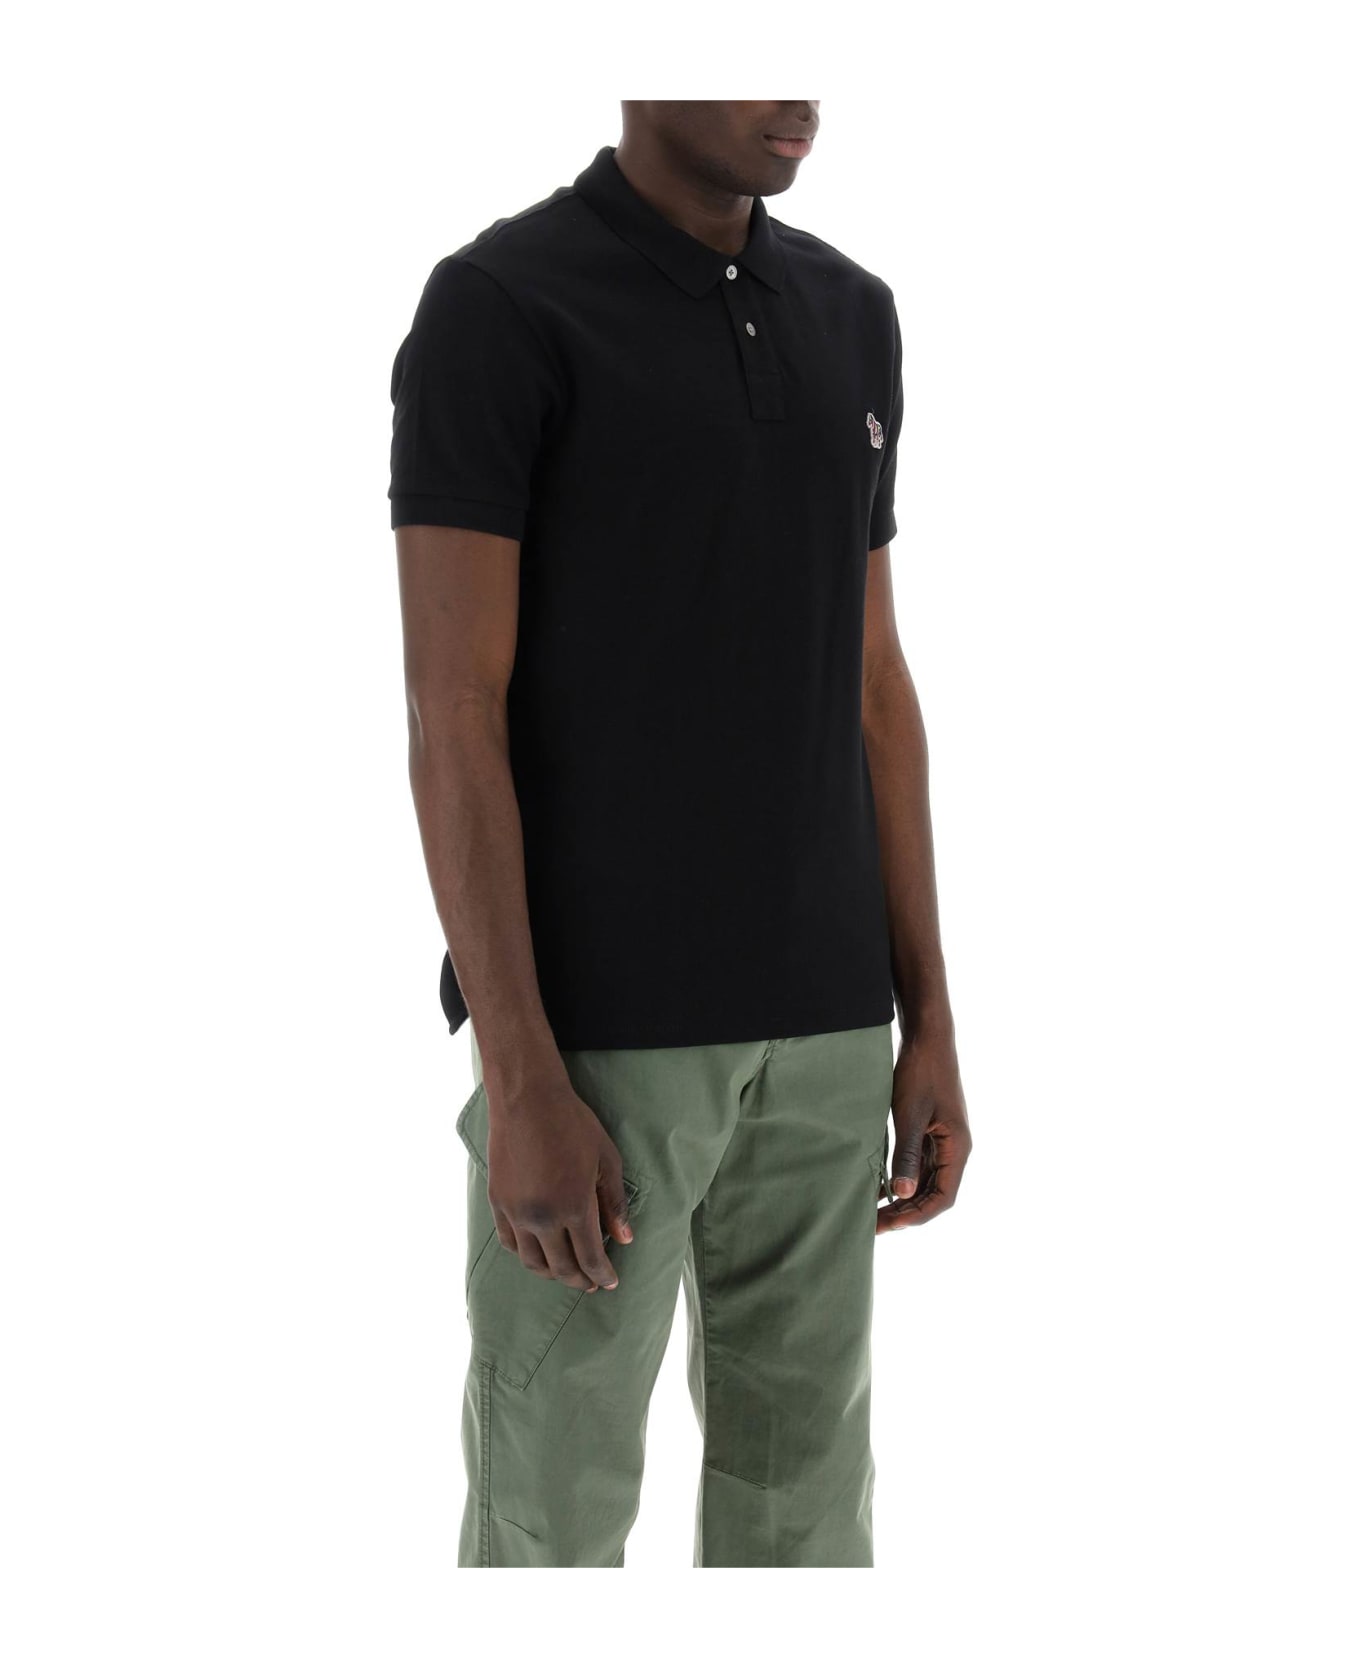 PS by Paul Smith Slim Fit Polo Shirt In Organic Cotton - BLACK (Black) ポロシャツ